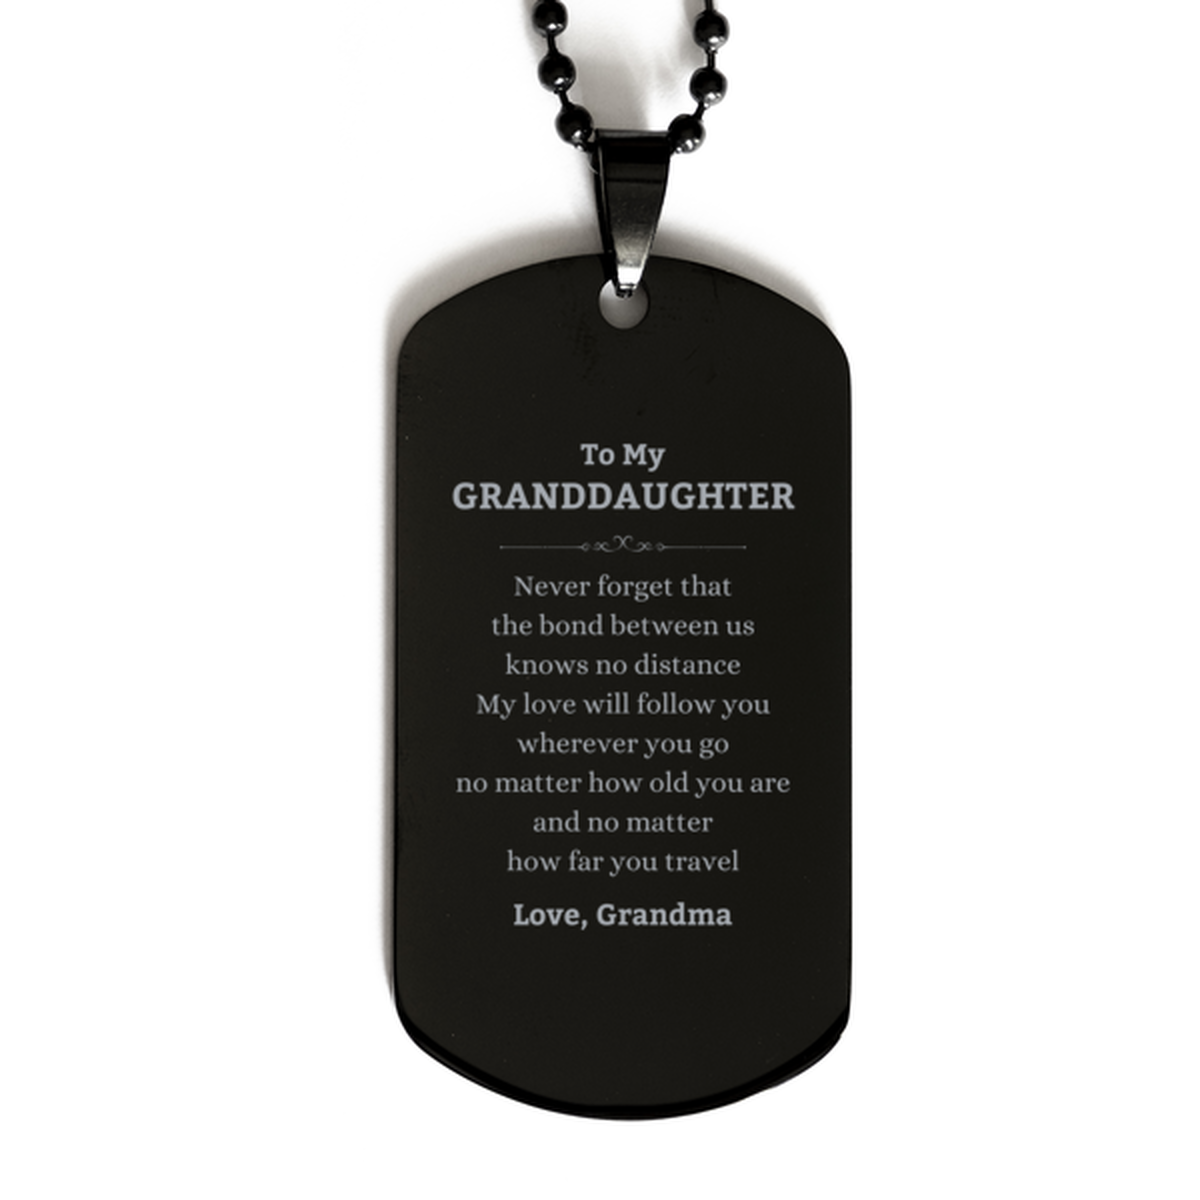 Granddaughter Birthday Gifts from Grandma, Adjustable Black Dog Tag for Granddaughter Christmas Graduation Unique Gifts Granddaughter Never forget that the bond between us knows no distance. Love, Grandma